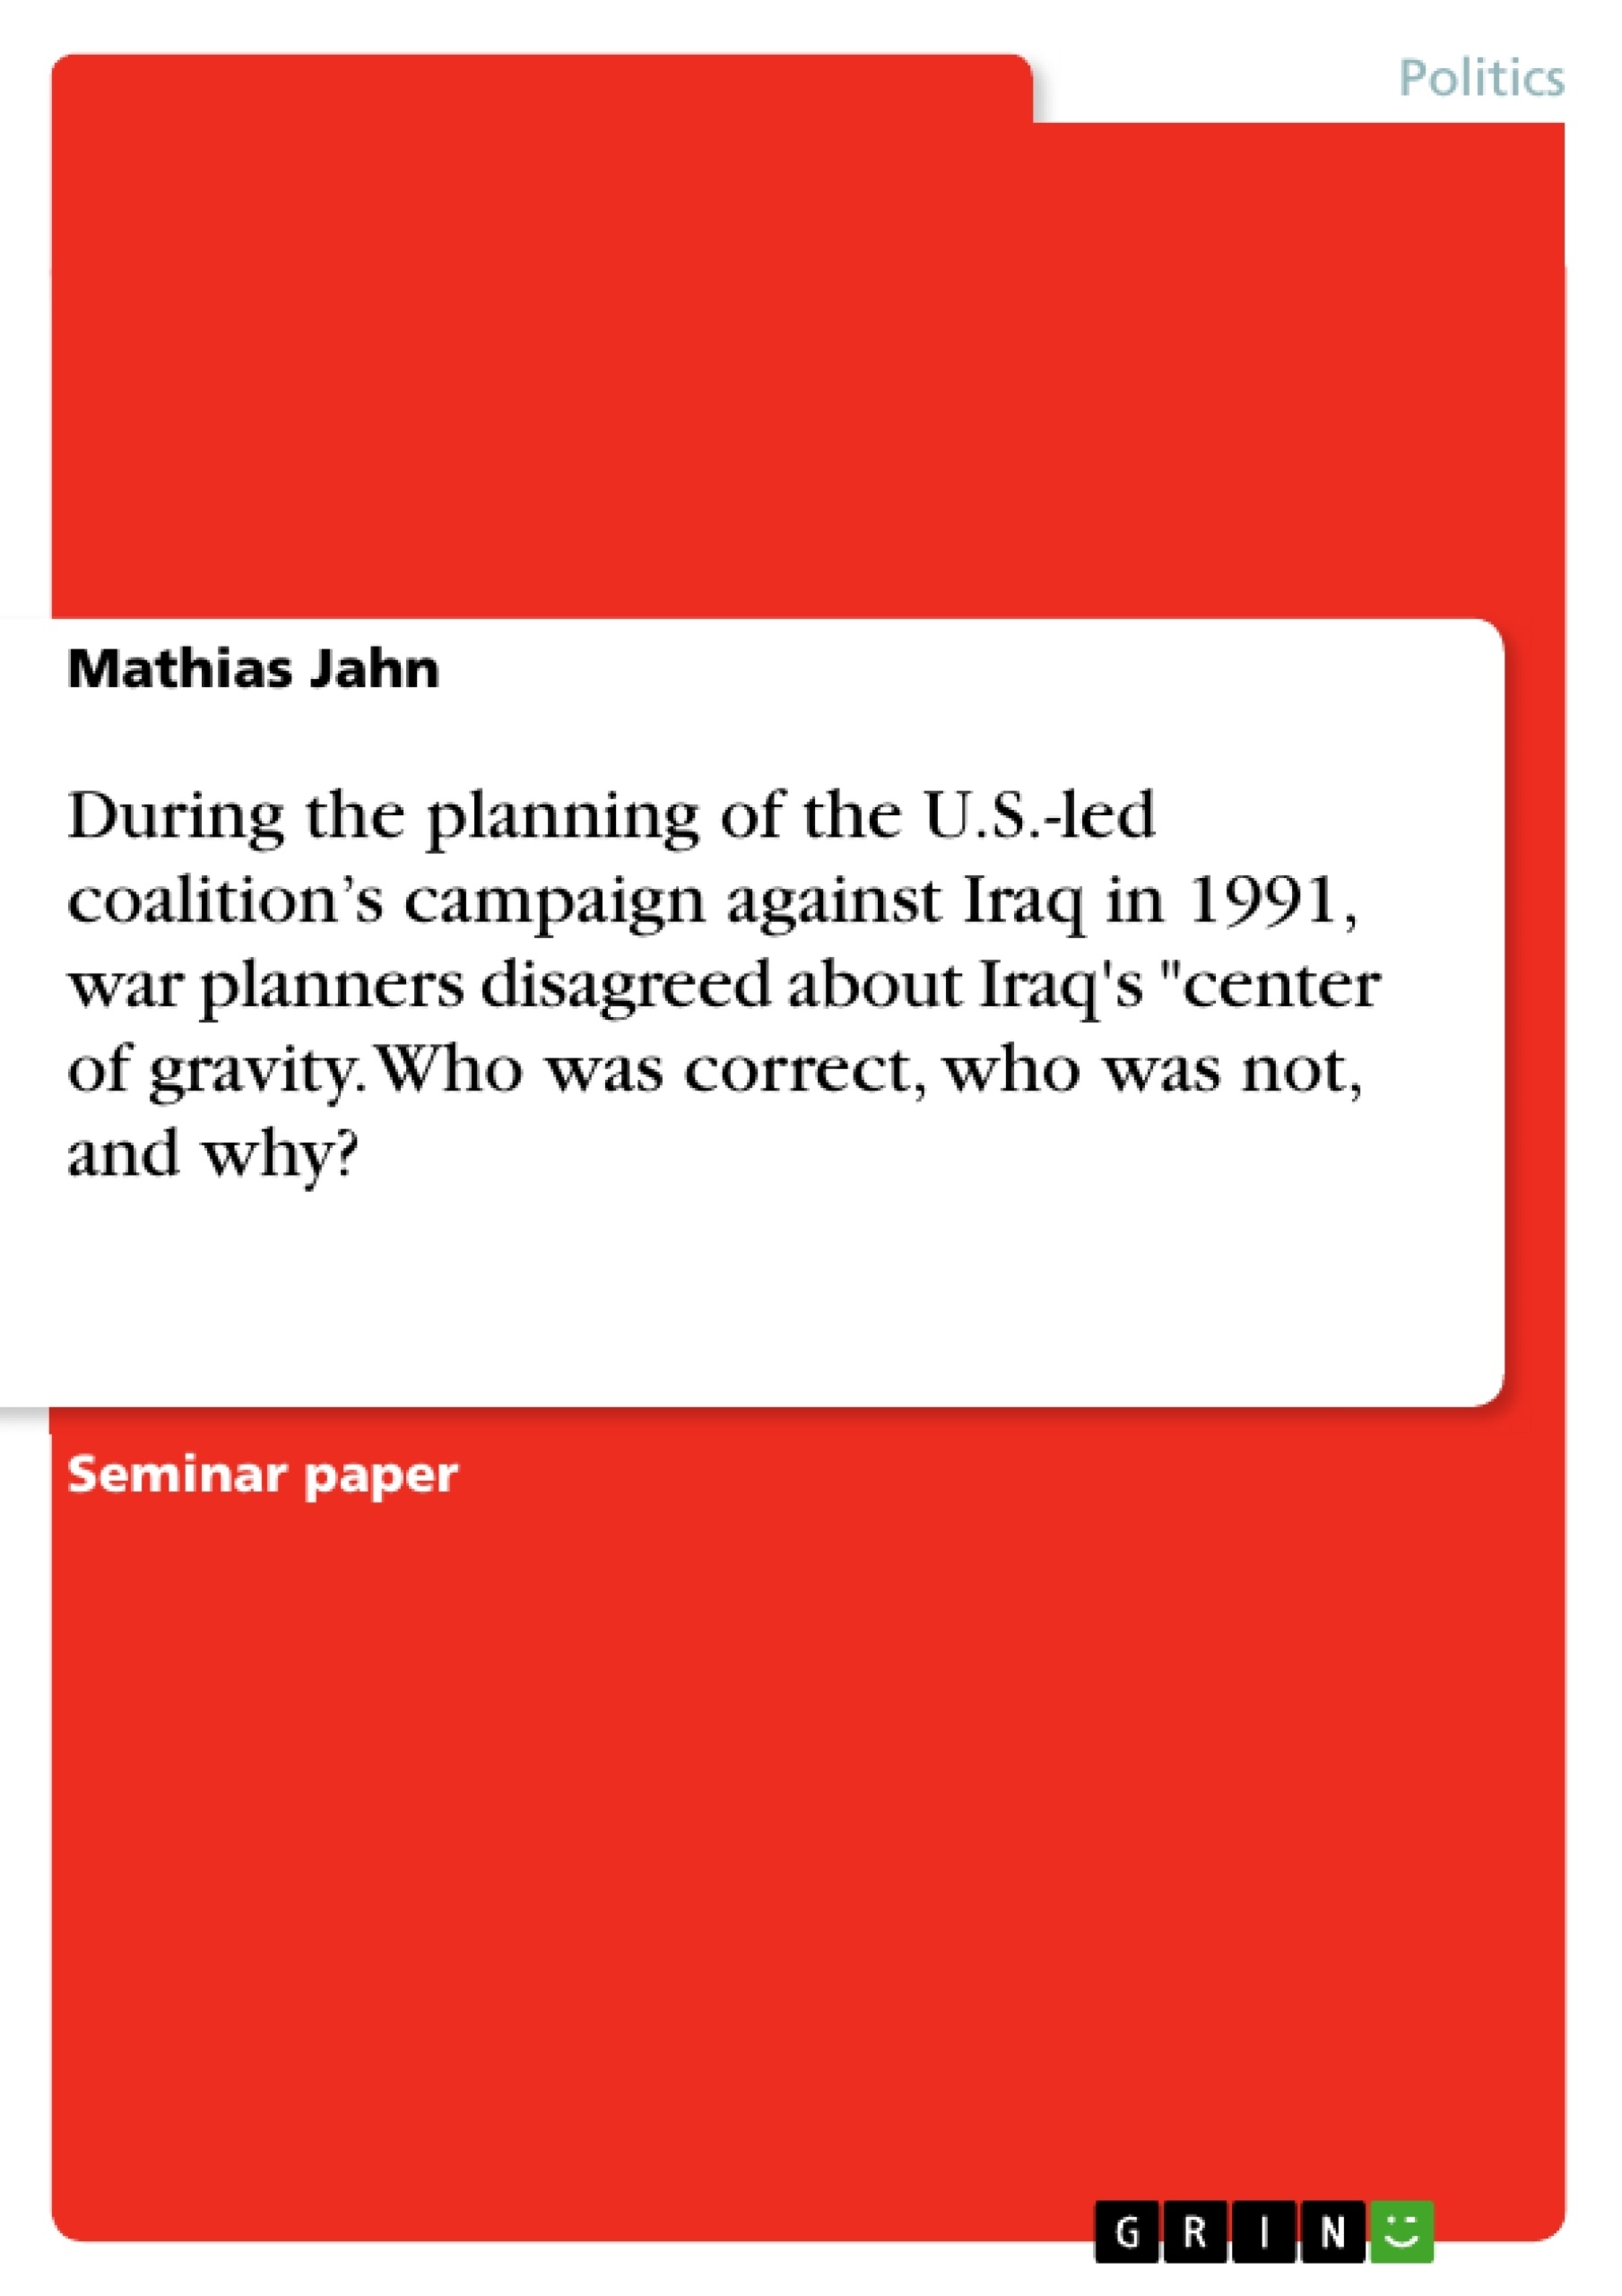 Title: During the planning of the U.S.-led coalition’s campaign against Iraq in 1991, war planners disagreed about Iraq's "center of gravity. Who was correct, who was not, and why?